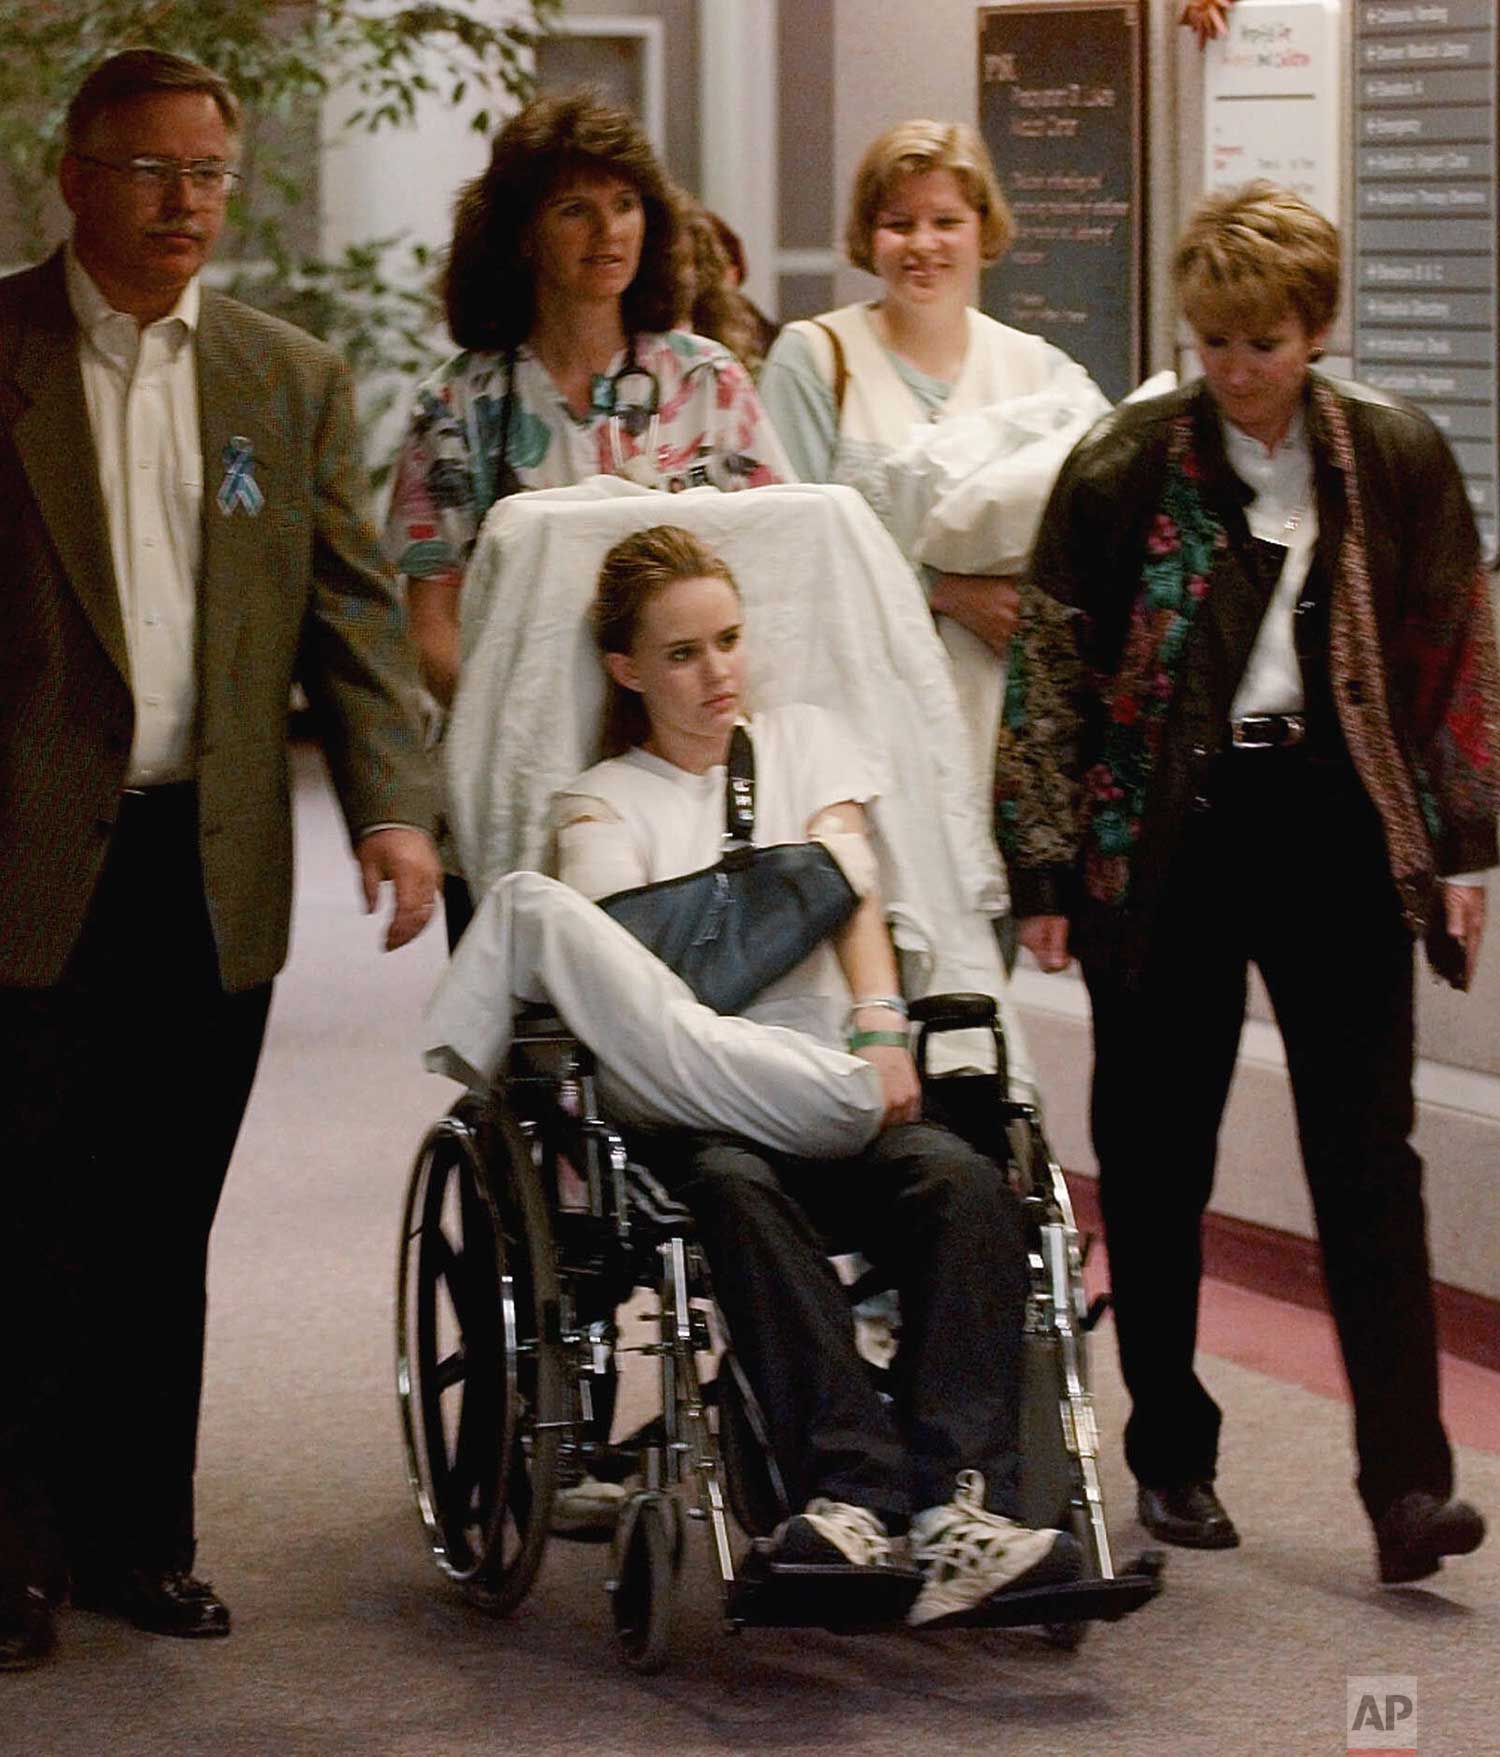  Kacey Ruegsegger, 17, is wheeled from a Denver hospital by Patty Anderson, center, after being released on Saturday, May 1, 1999. Walking beside her are her parents Greg, left, and Darcy, right. Kacey was shot in the shoulder during the shooting ram